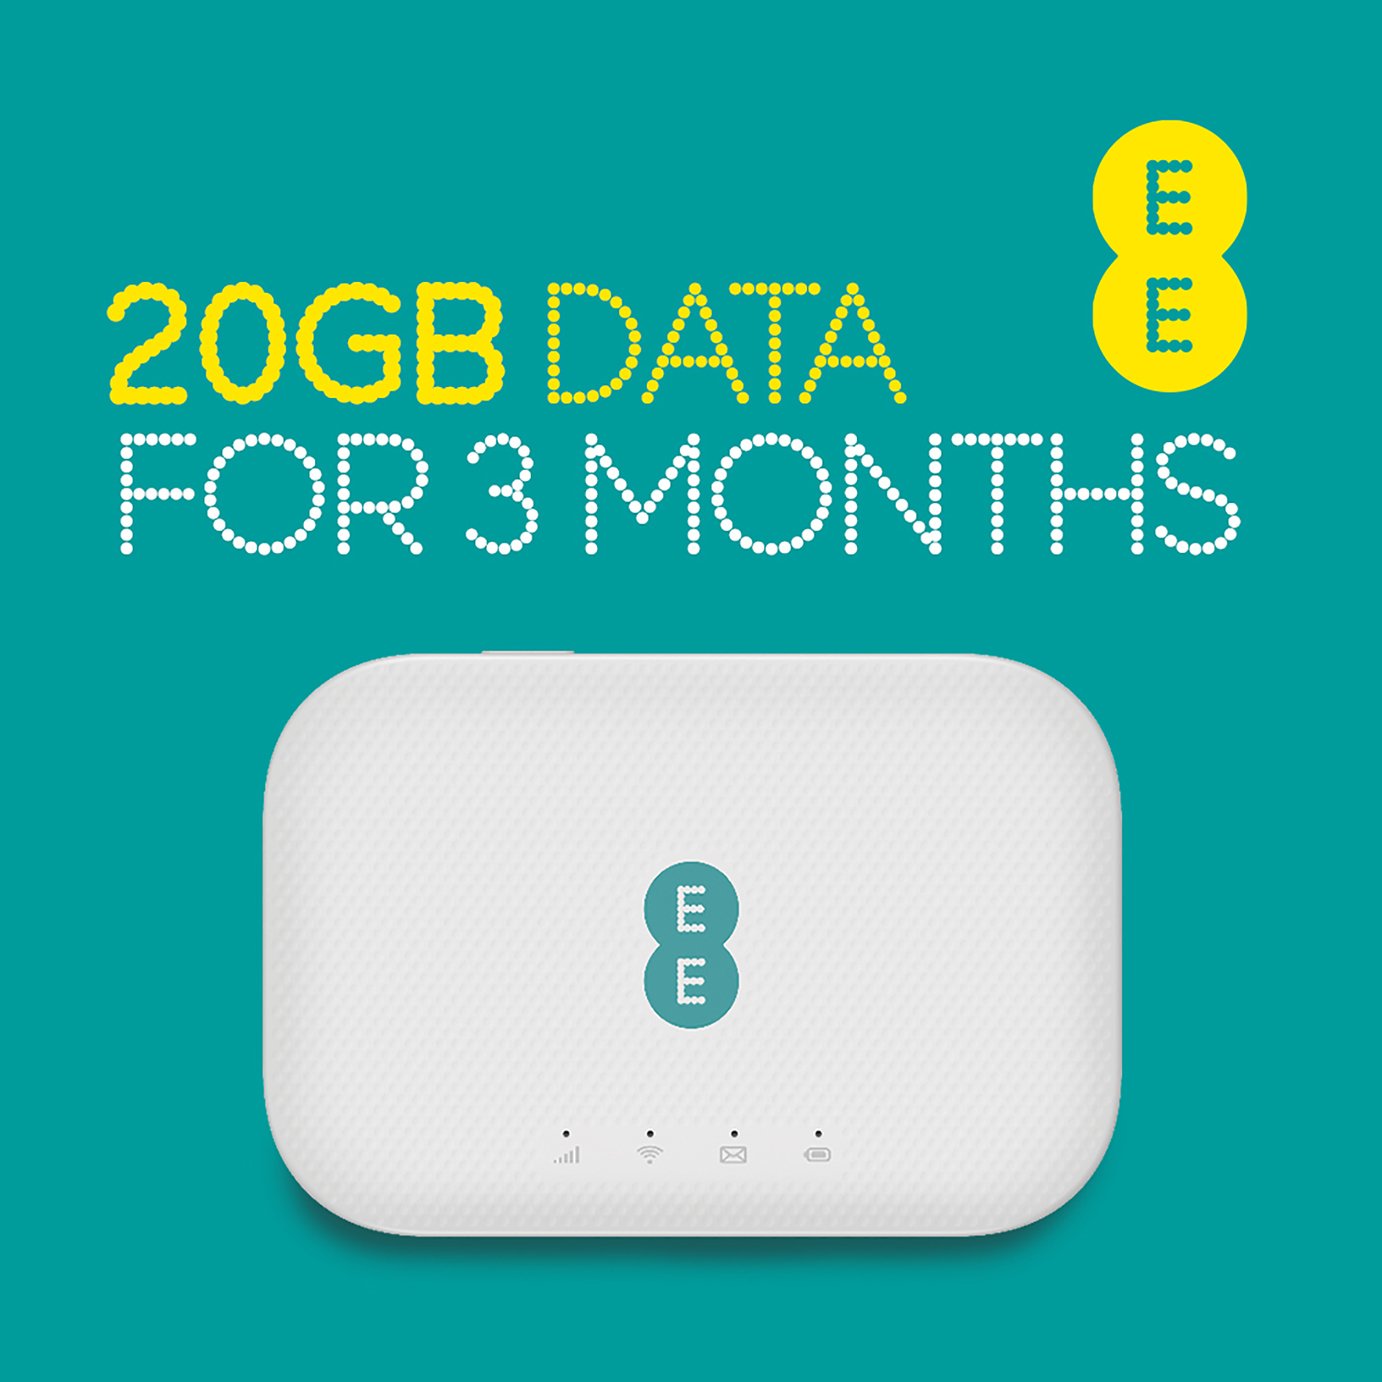 EE 4G 20GB Mobile Wi-Fi Router Review